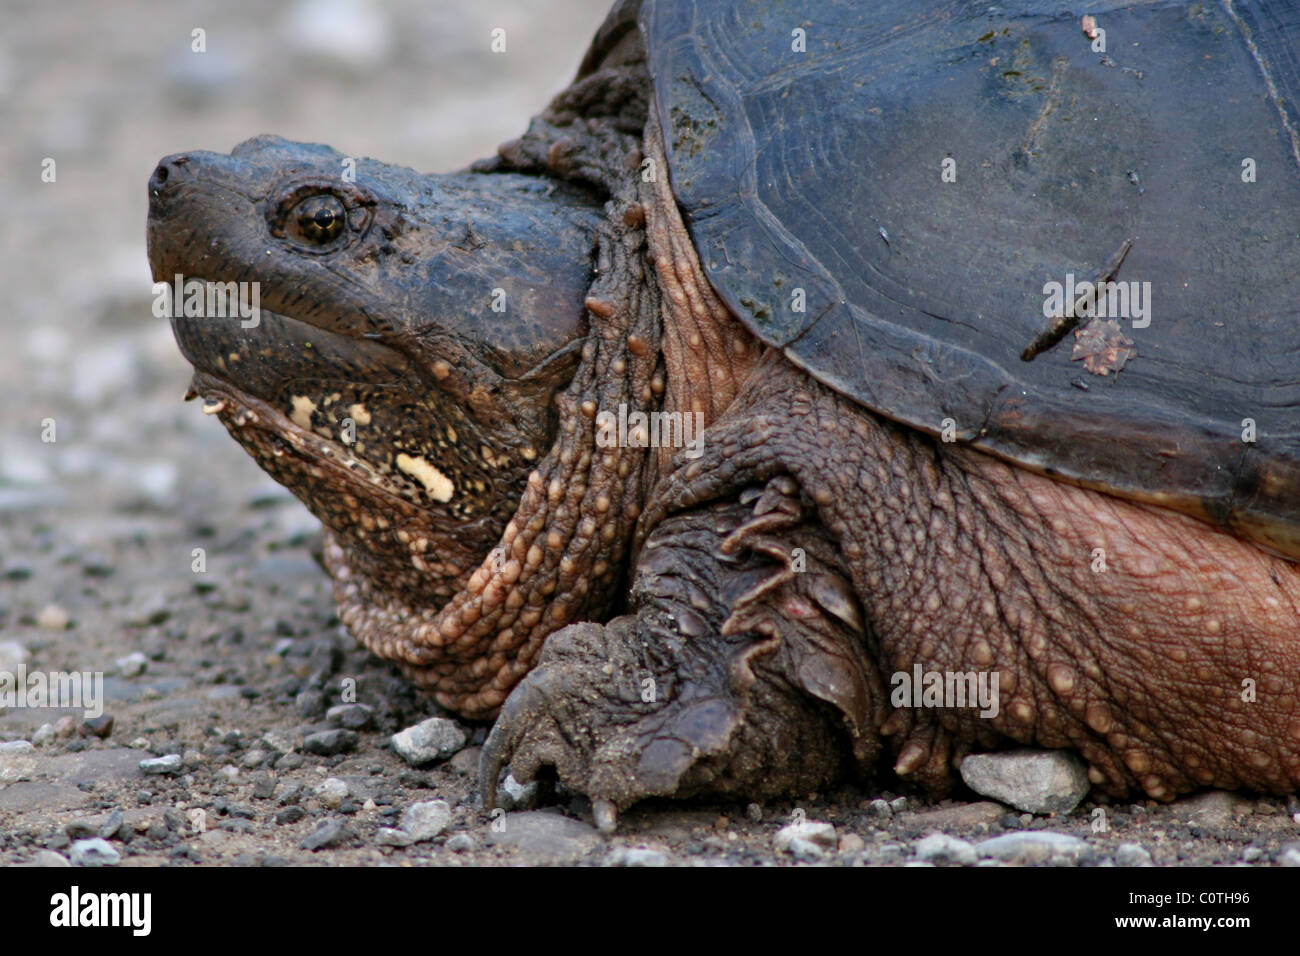 A Snapping Turtle walking along gravel. Stock Photo